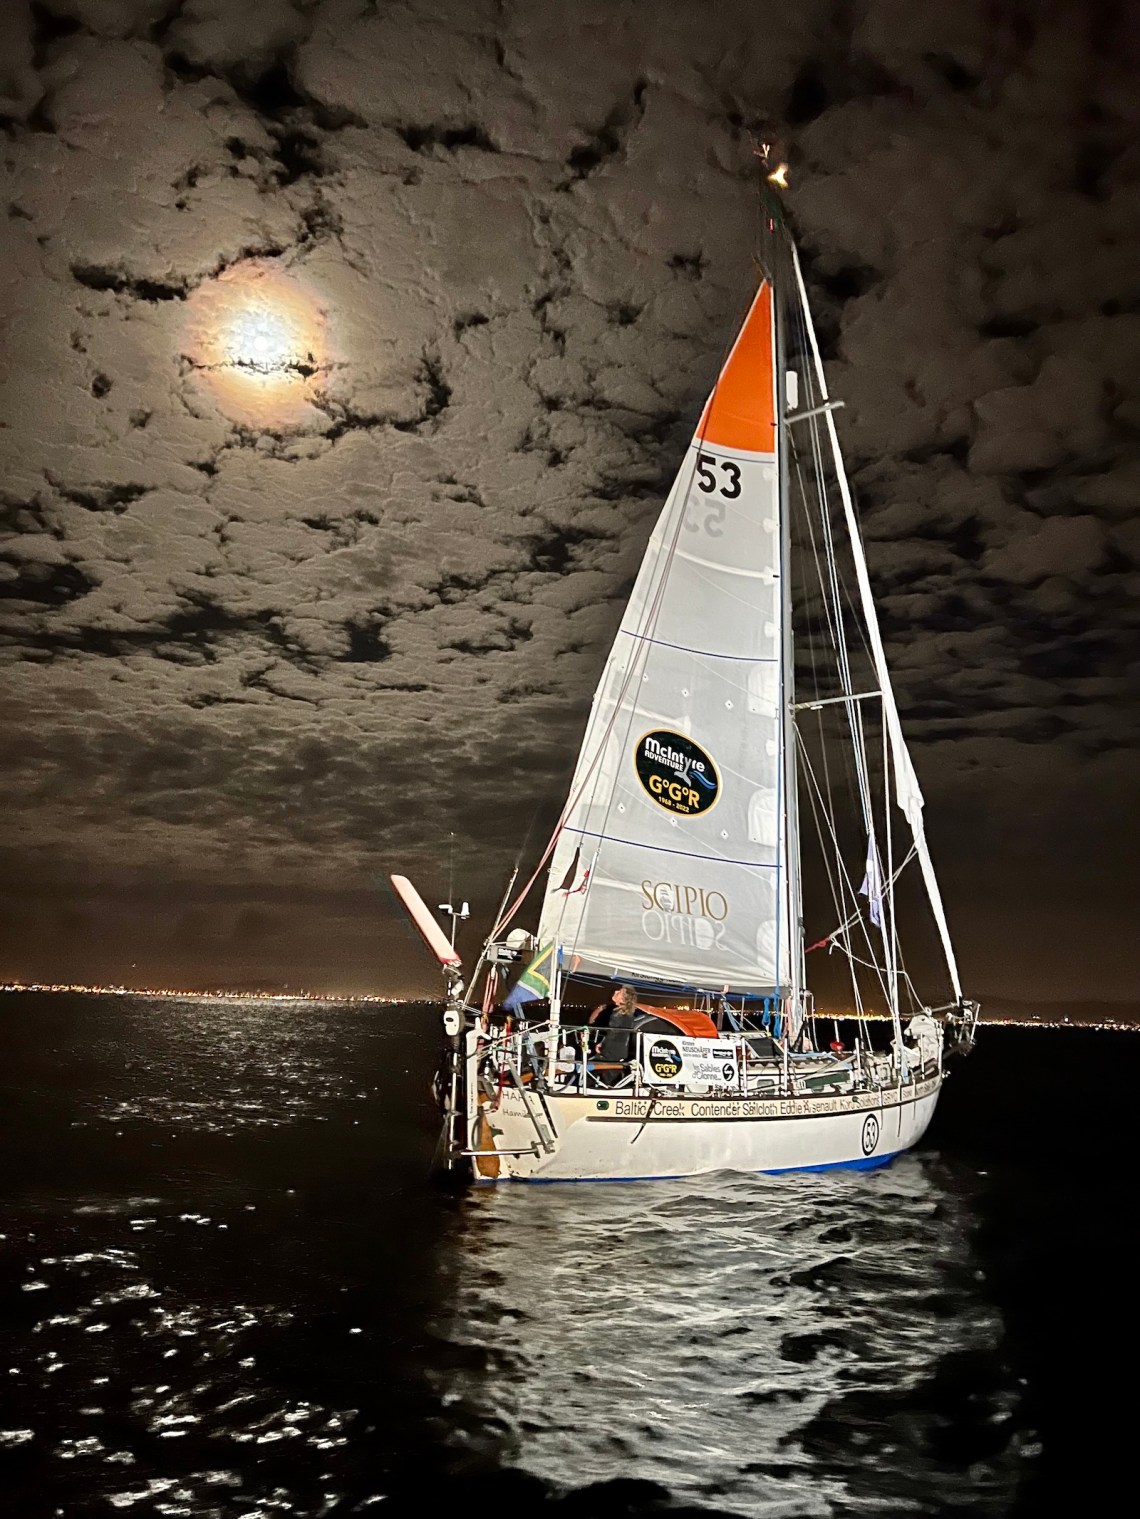 A white sailboat offshore of Cape Town at night under a cloudy full moon